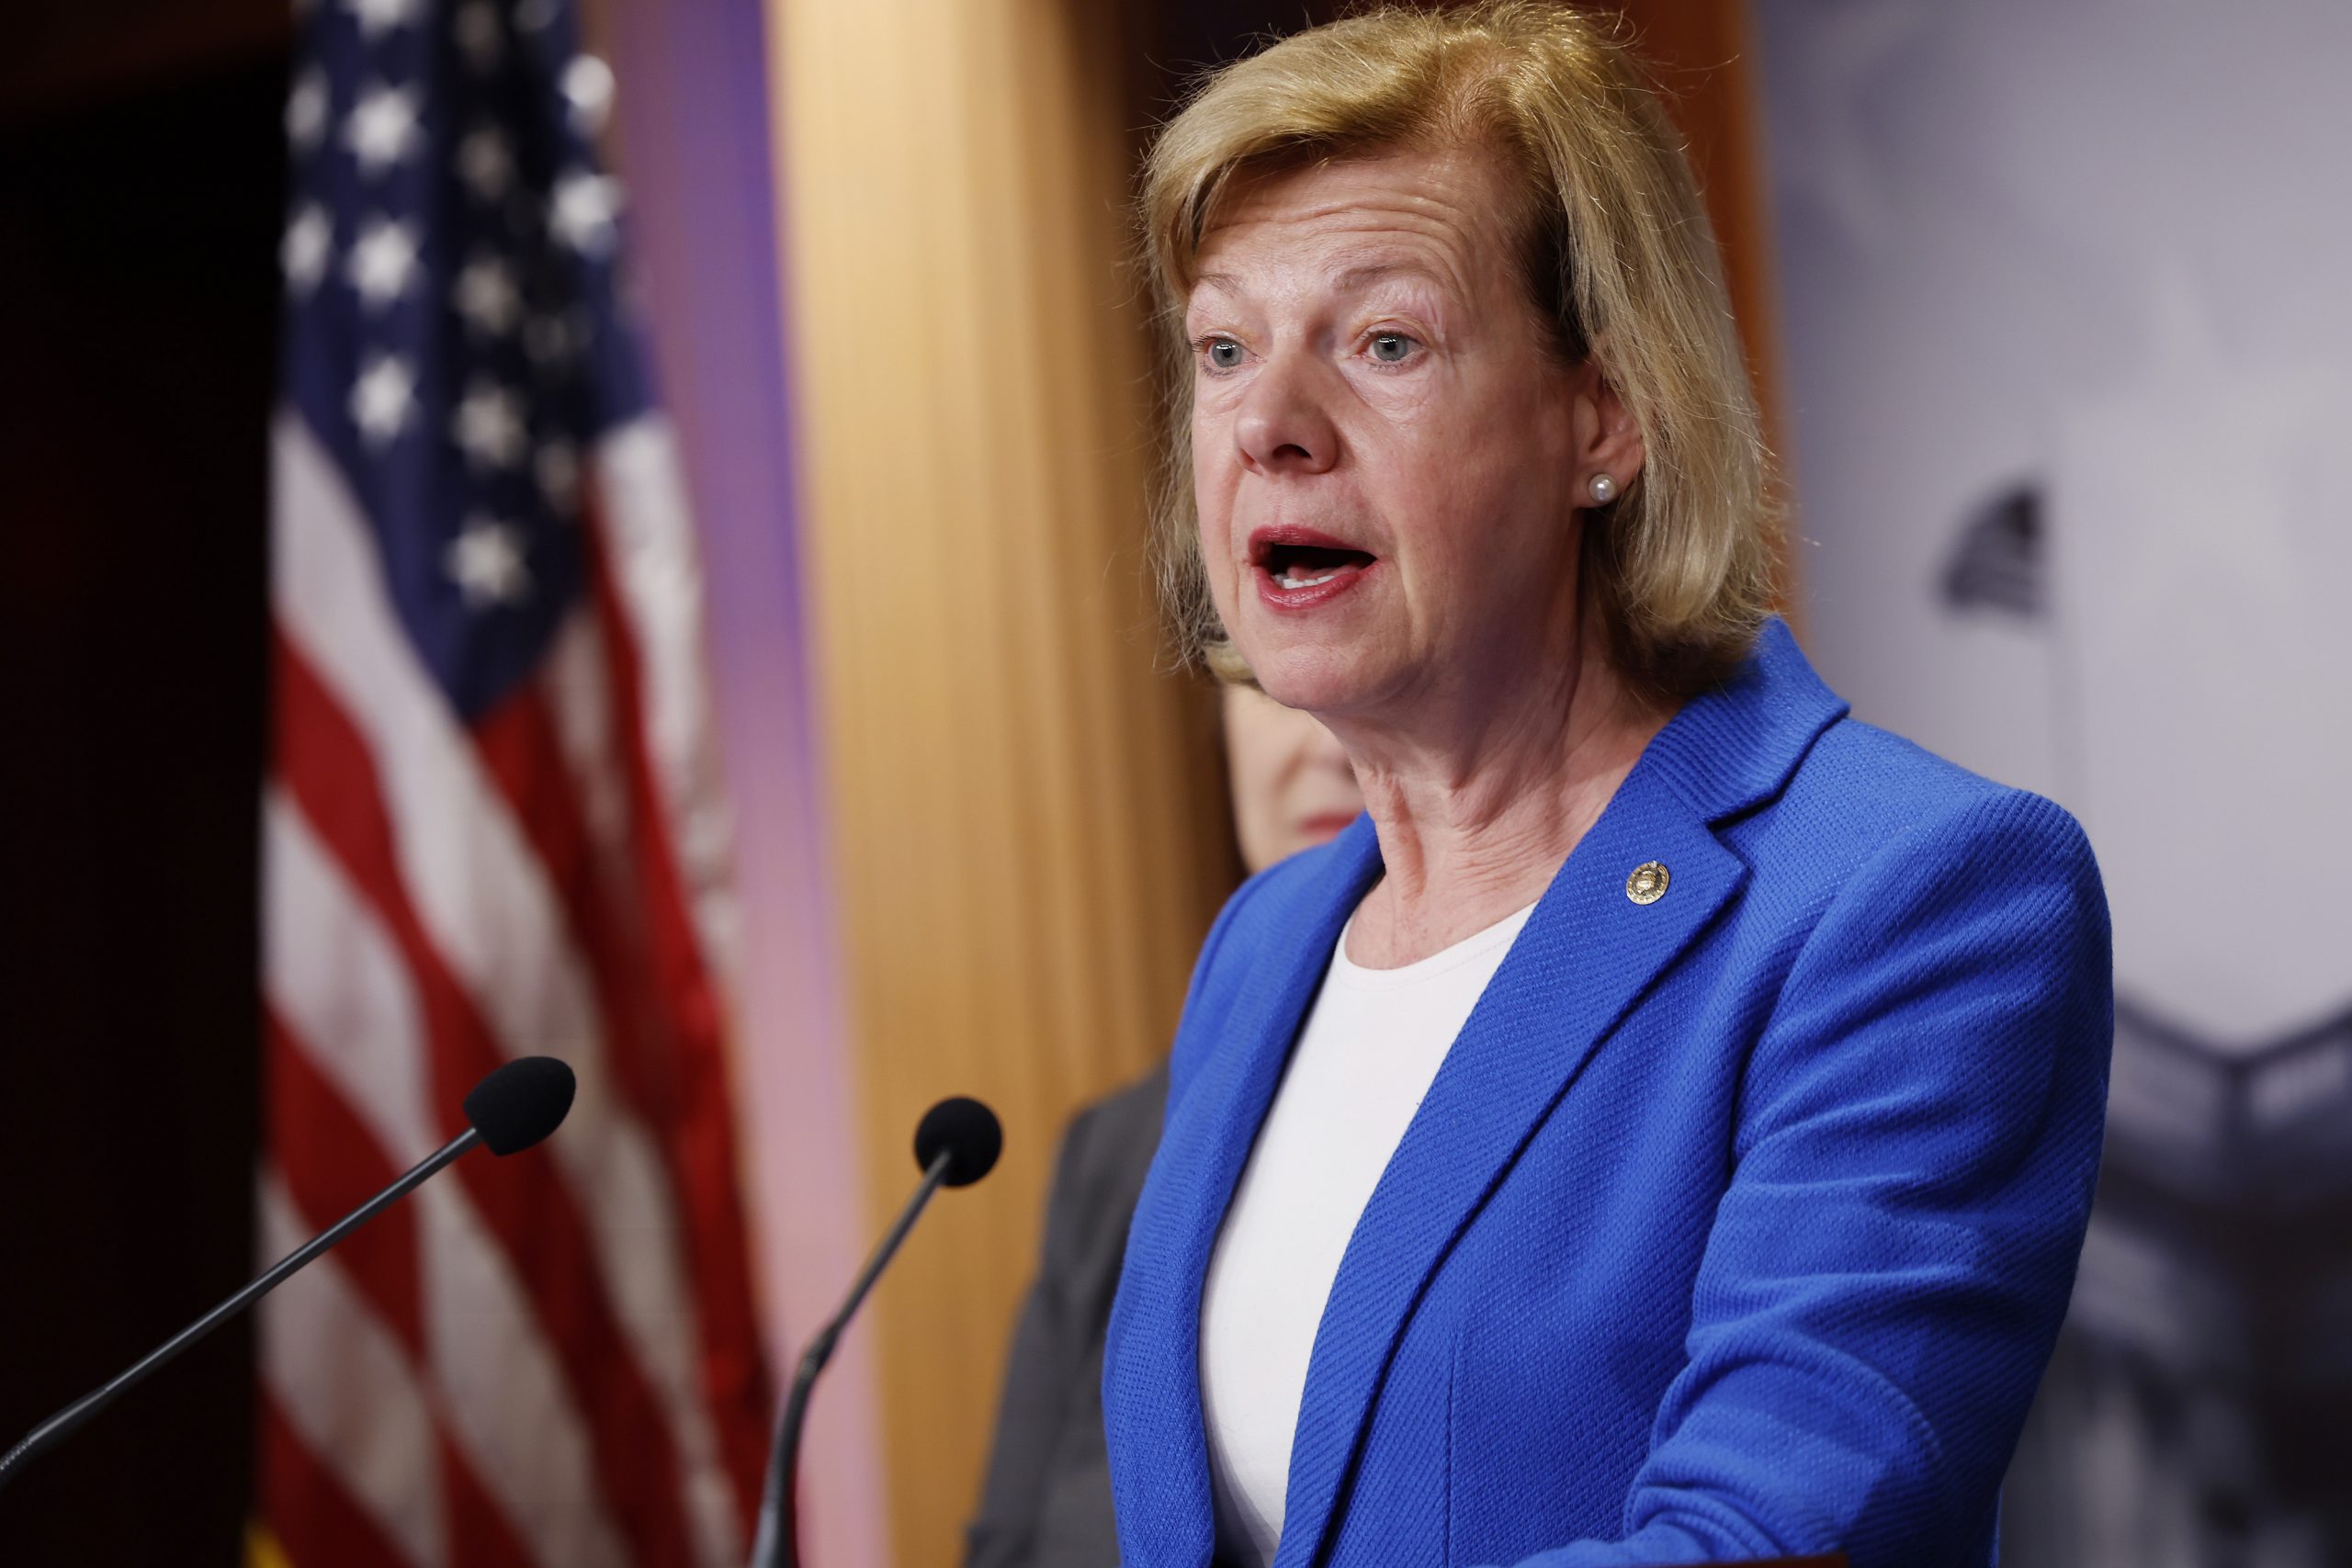 Tammy Baldwin Calls Mayorkas Impeachment 'Political Games'—But She Spearheaded Impeachments of George W. Bush and Dick Cheney